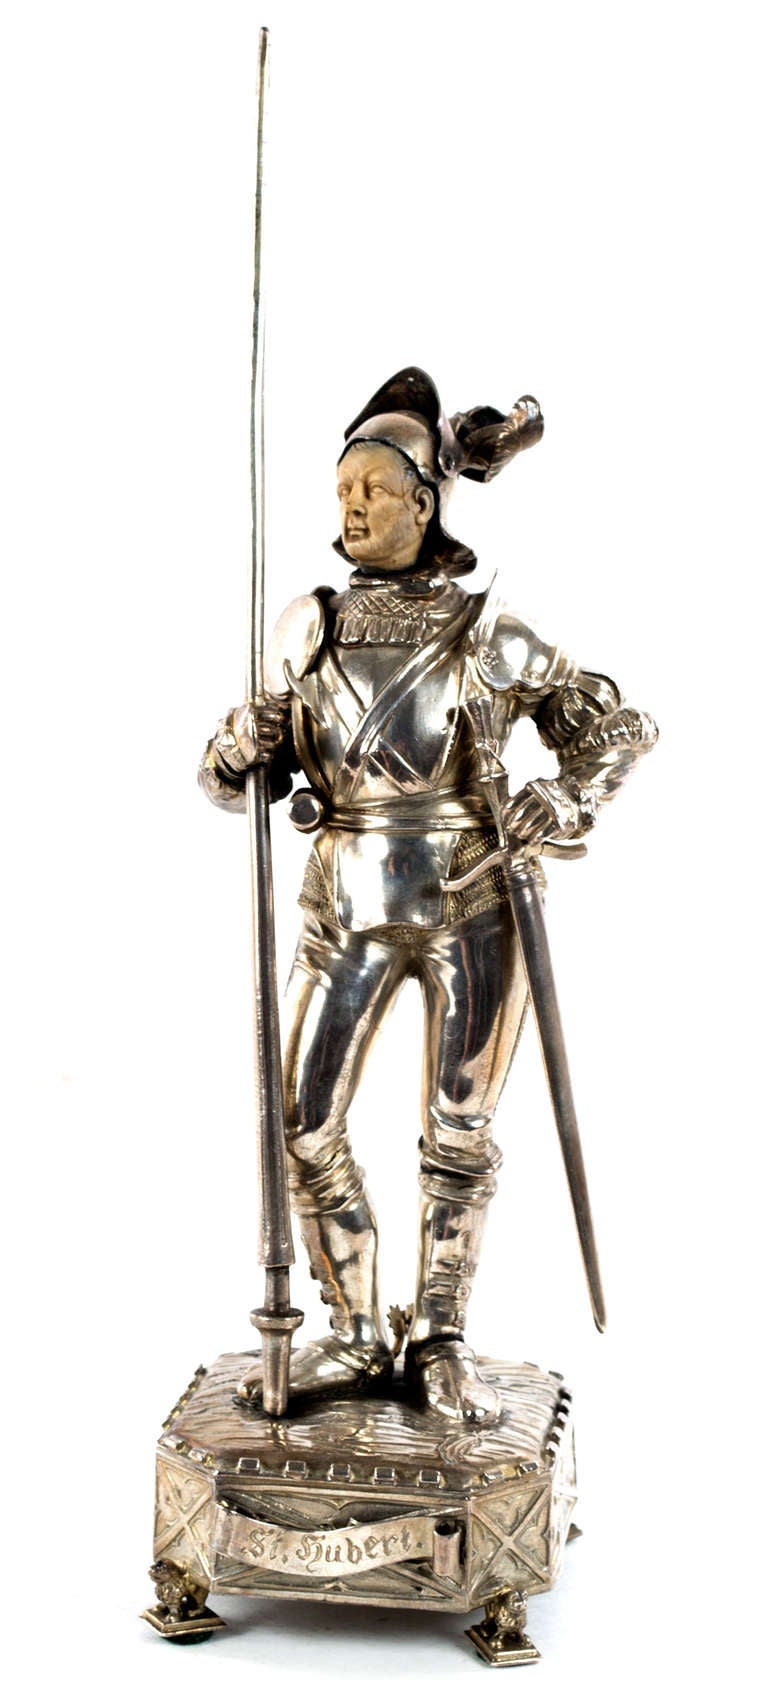 The work of a highly skilled sculptor, this sterling silver statue of St. Hubert, Patron Saint of Hunters, is dressed in a romanticized suit of armor, holding a tall lance, and standing on a pedestal resting on four lions.